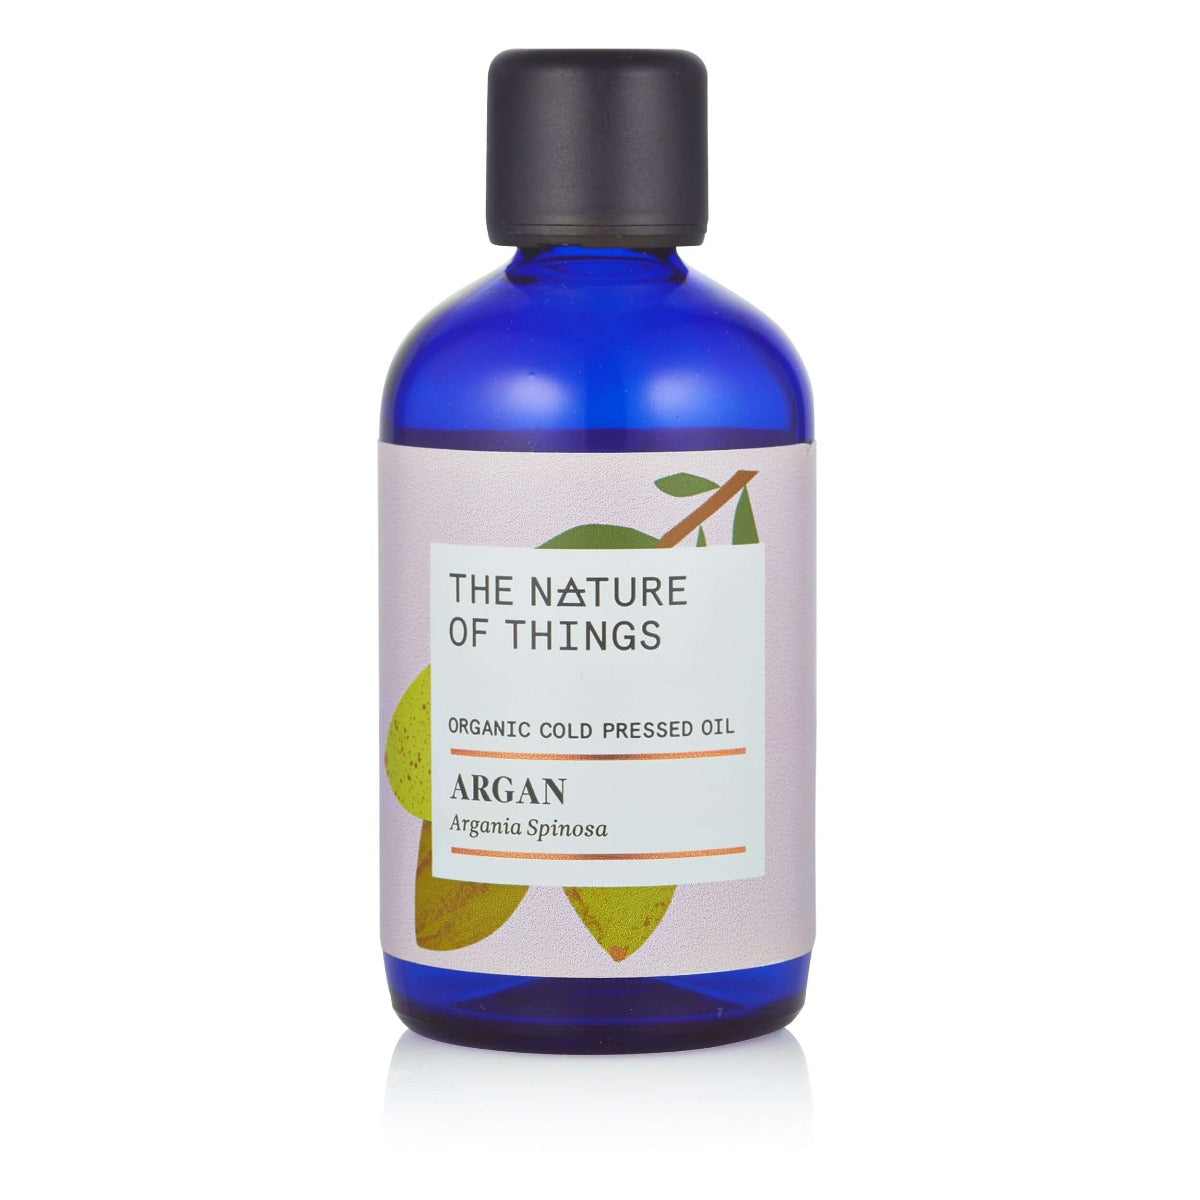 Organic Argan Oil from The Nature of Things